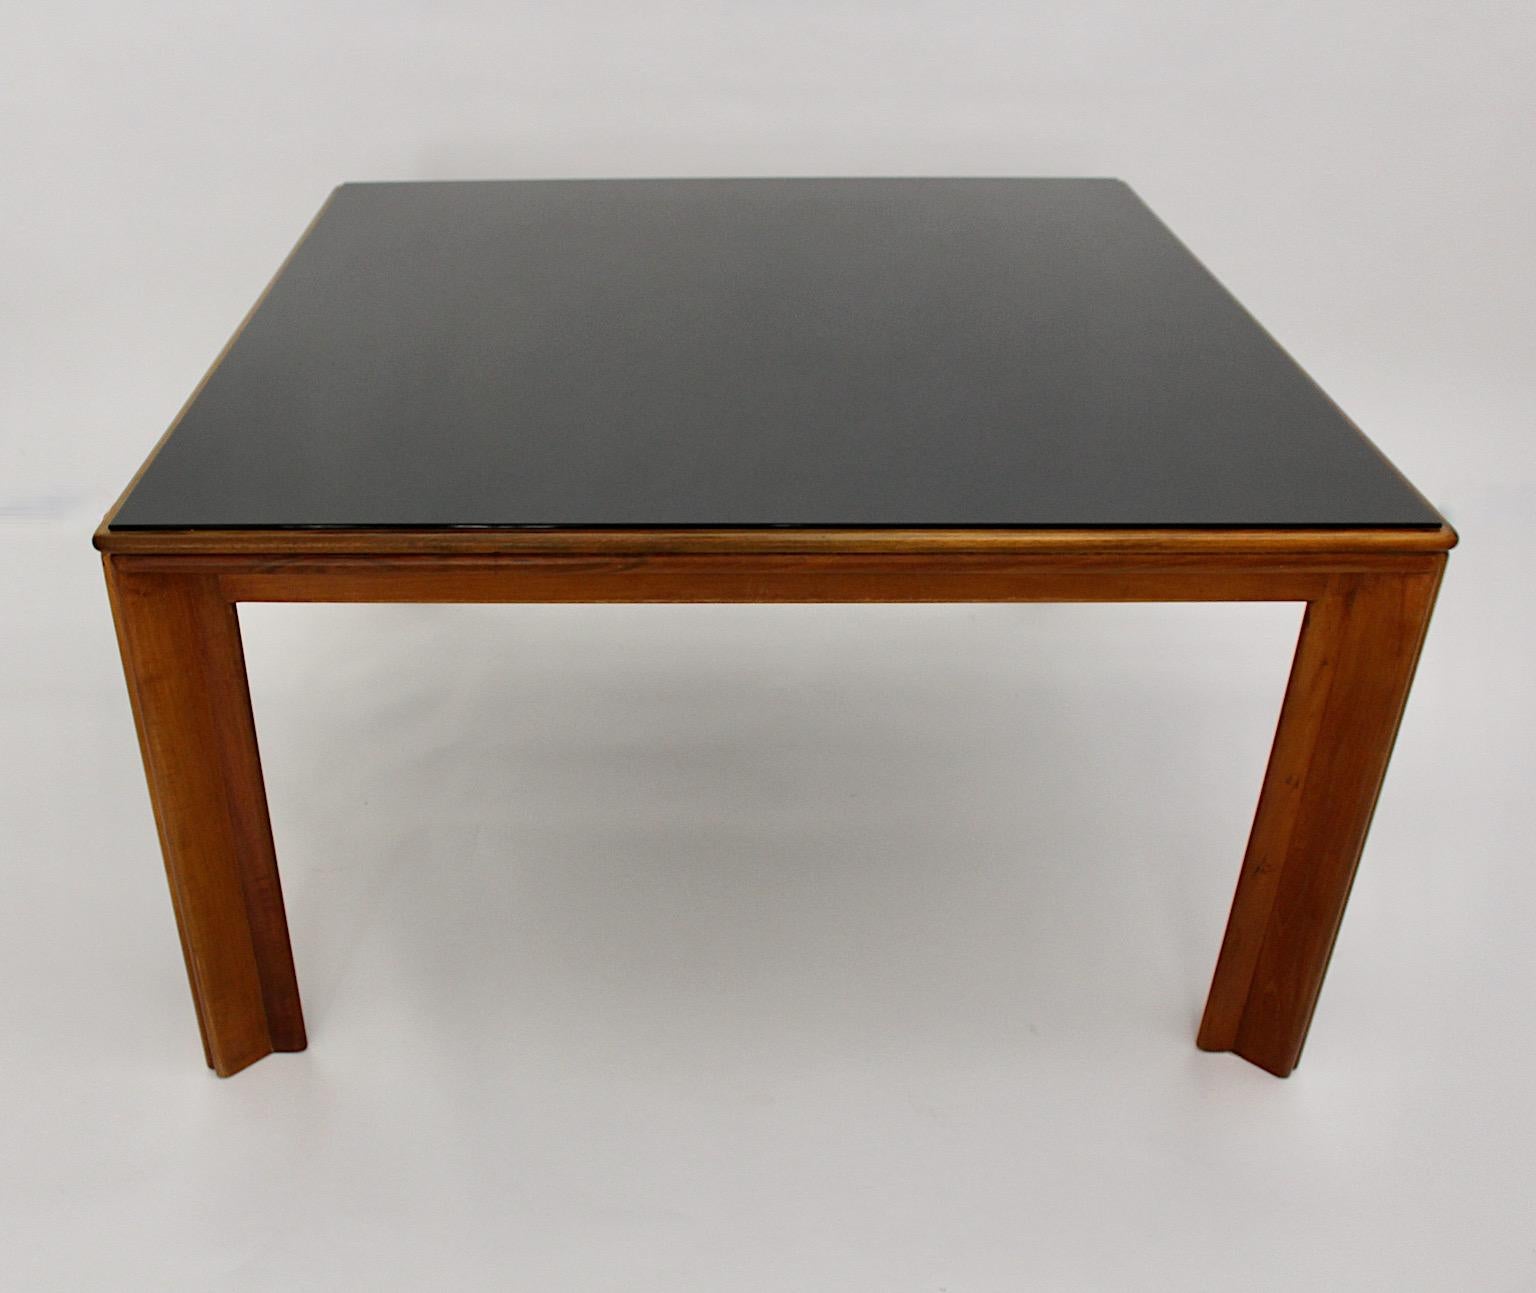 Modernist vintage dining table or center table from walnut and black glass designed by Afra & Tobia Scarpa 1970s Italy.
A beautiful dining table with a blonde walnut frame and the black glass top.
The plate is topped with a black glass plate, while